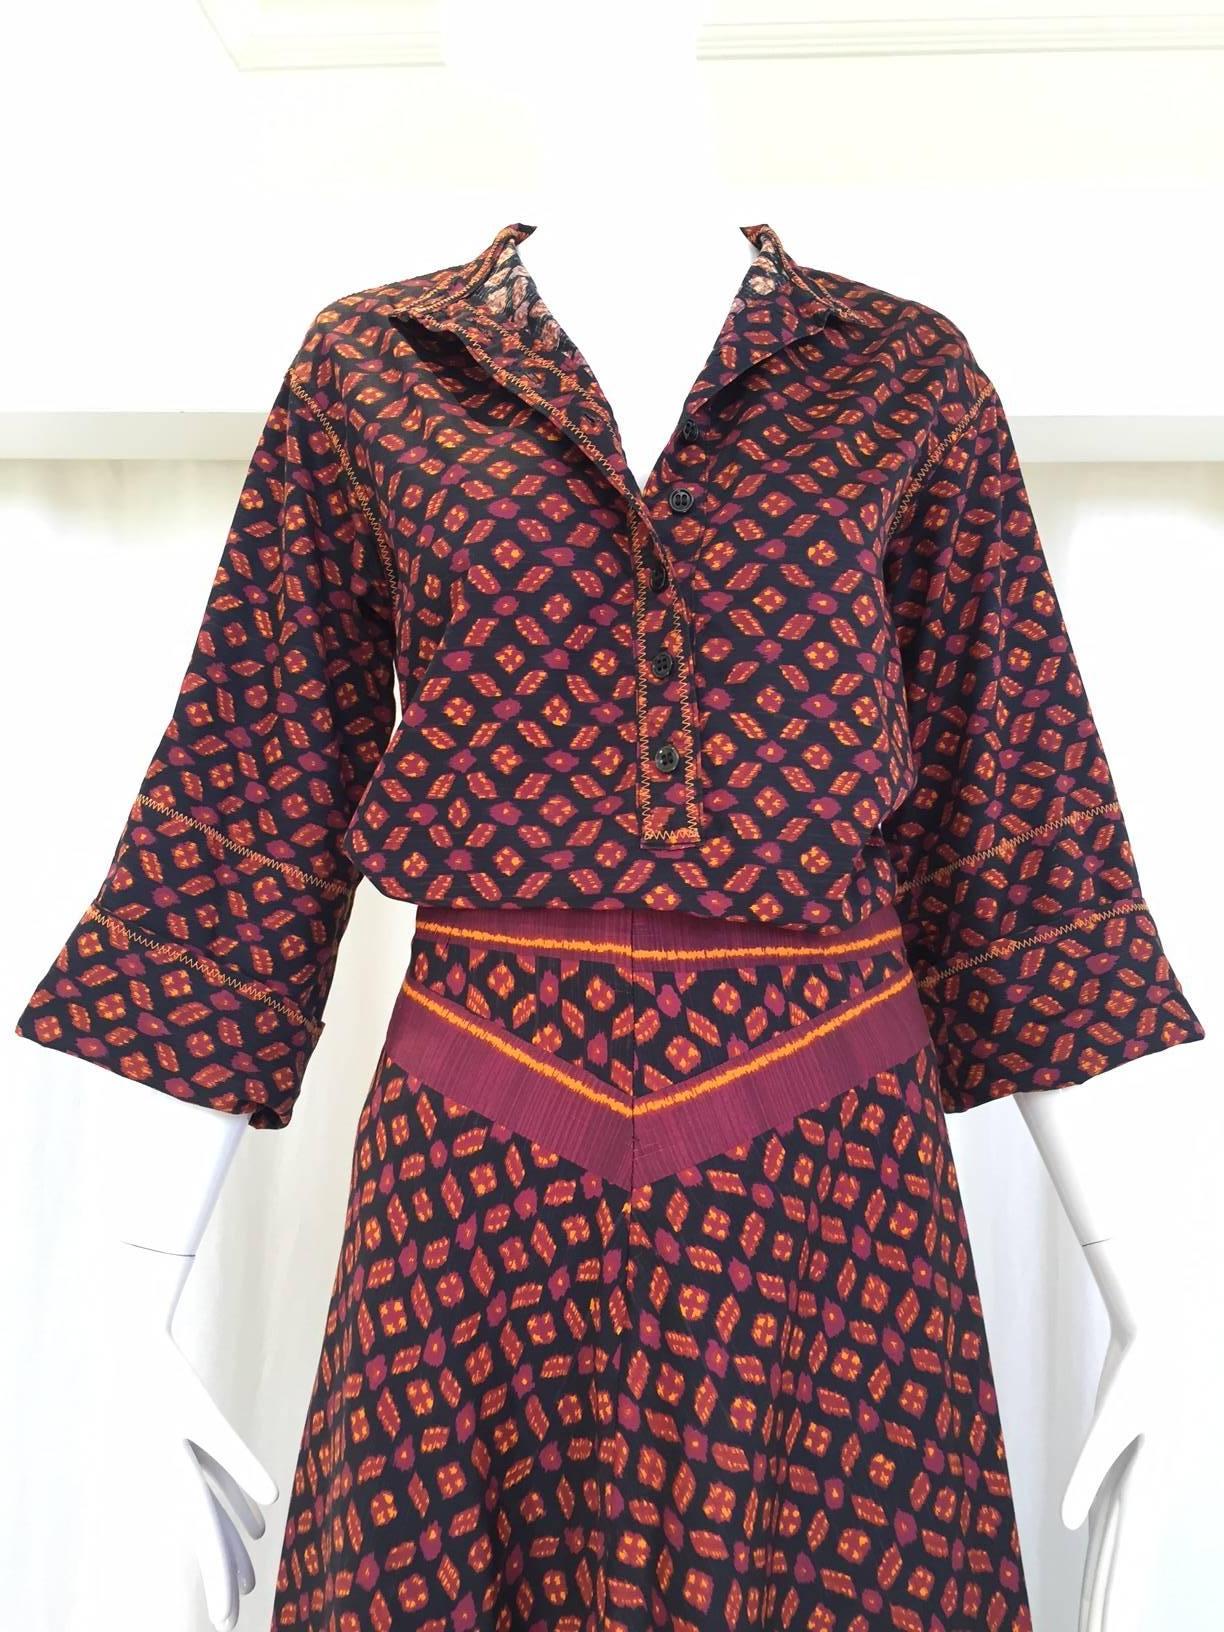 Vintage 1970s Anne Klein chic cotton burgundy and black ikat print blouse and maxi skirt ensemble. Blouse has 3/4 sleeve. 
 Fit Size Small - Medium
Blouse size: 6, Top is Size 6
Bust: 40"  20", Back collar to hem 25.5" Sleeve 11"